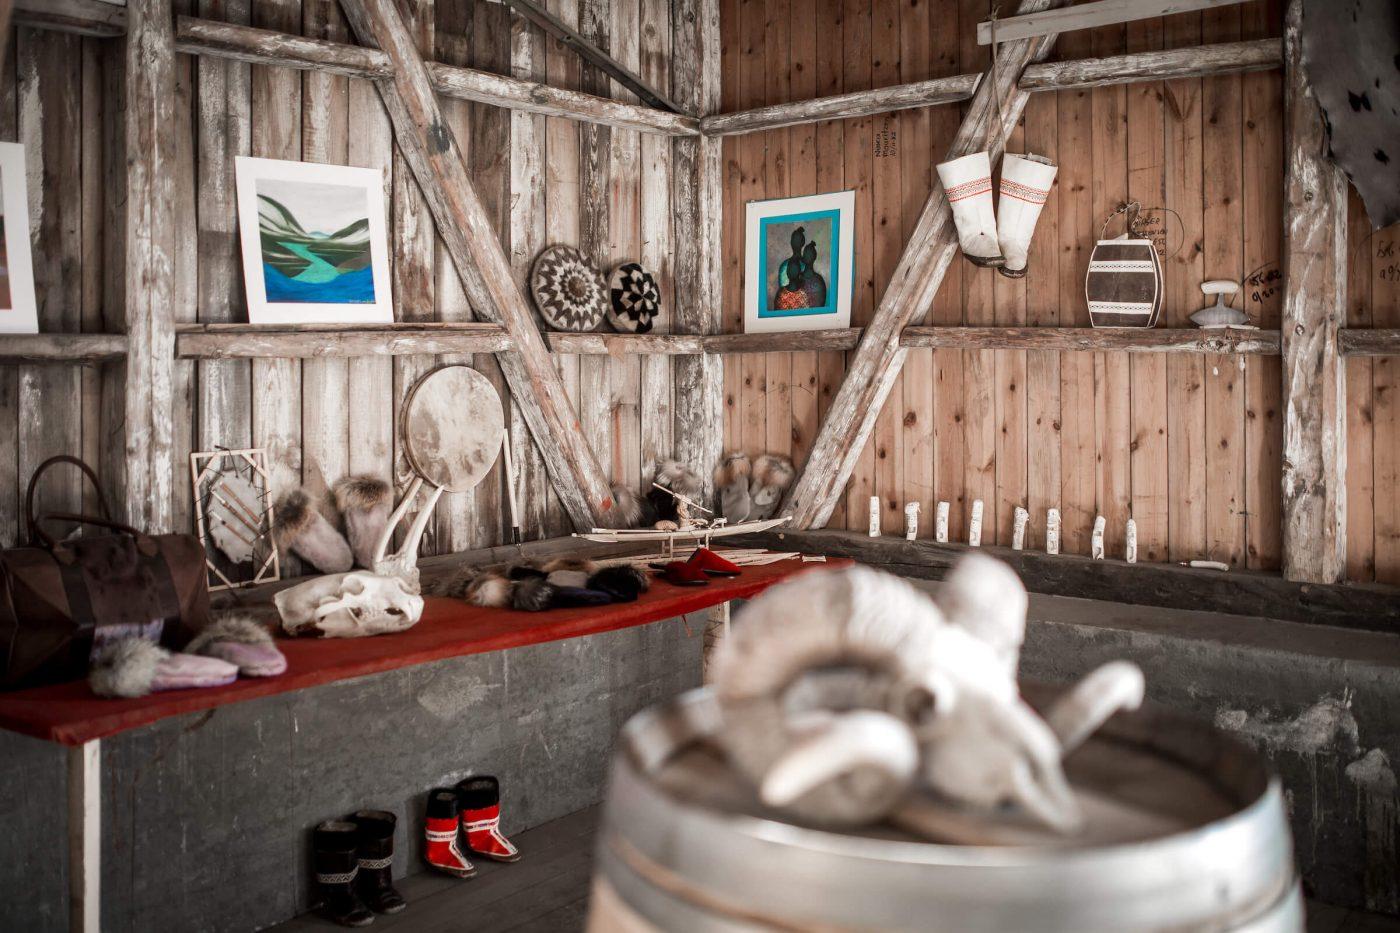 Inside the Hotel Narsaq art an crafts shop at the old harbour in Narsaq in South Greenland. Photo by Mads Pihl.